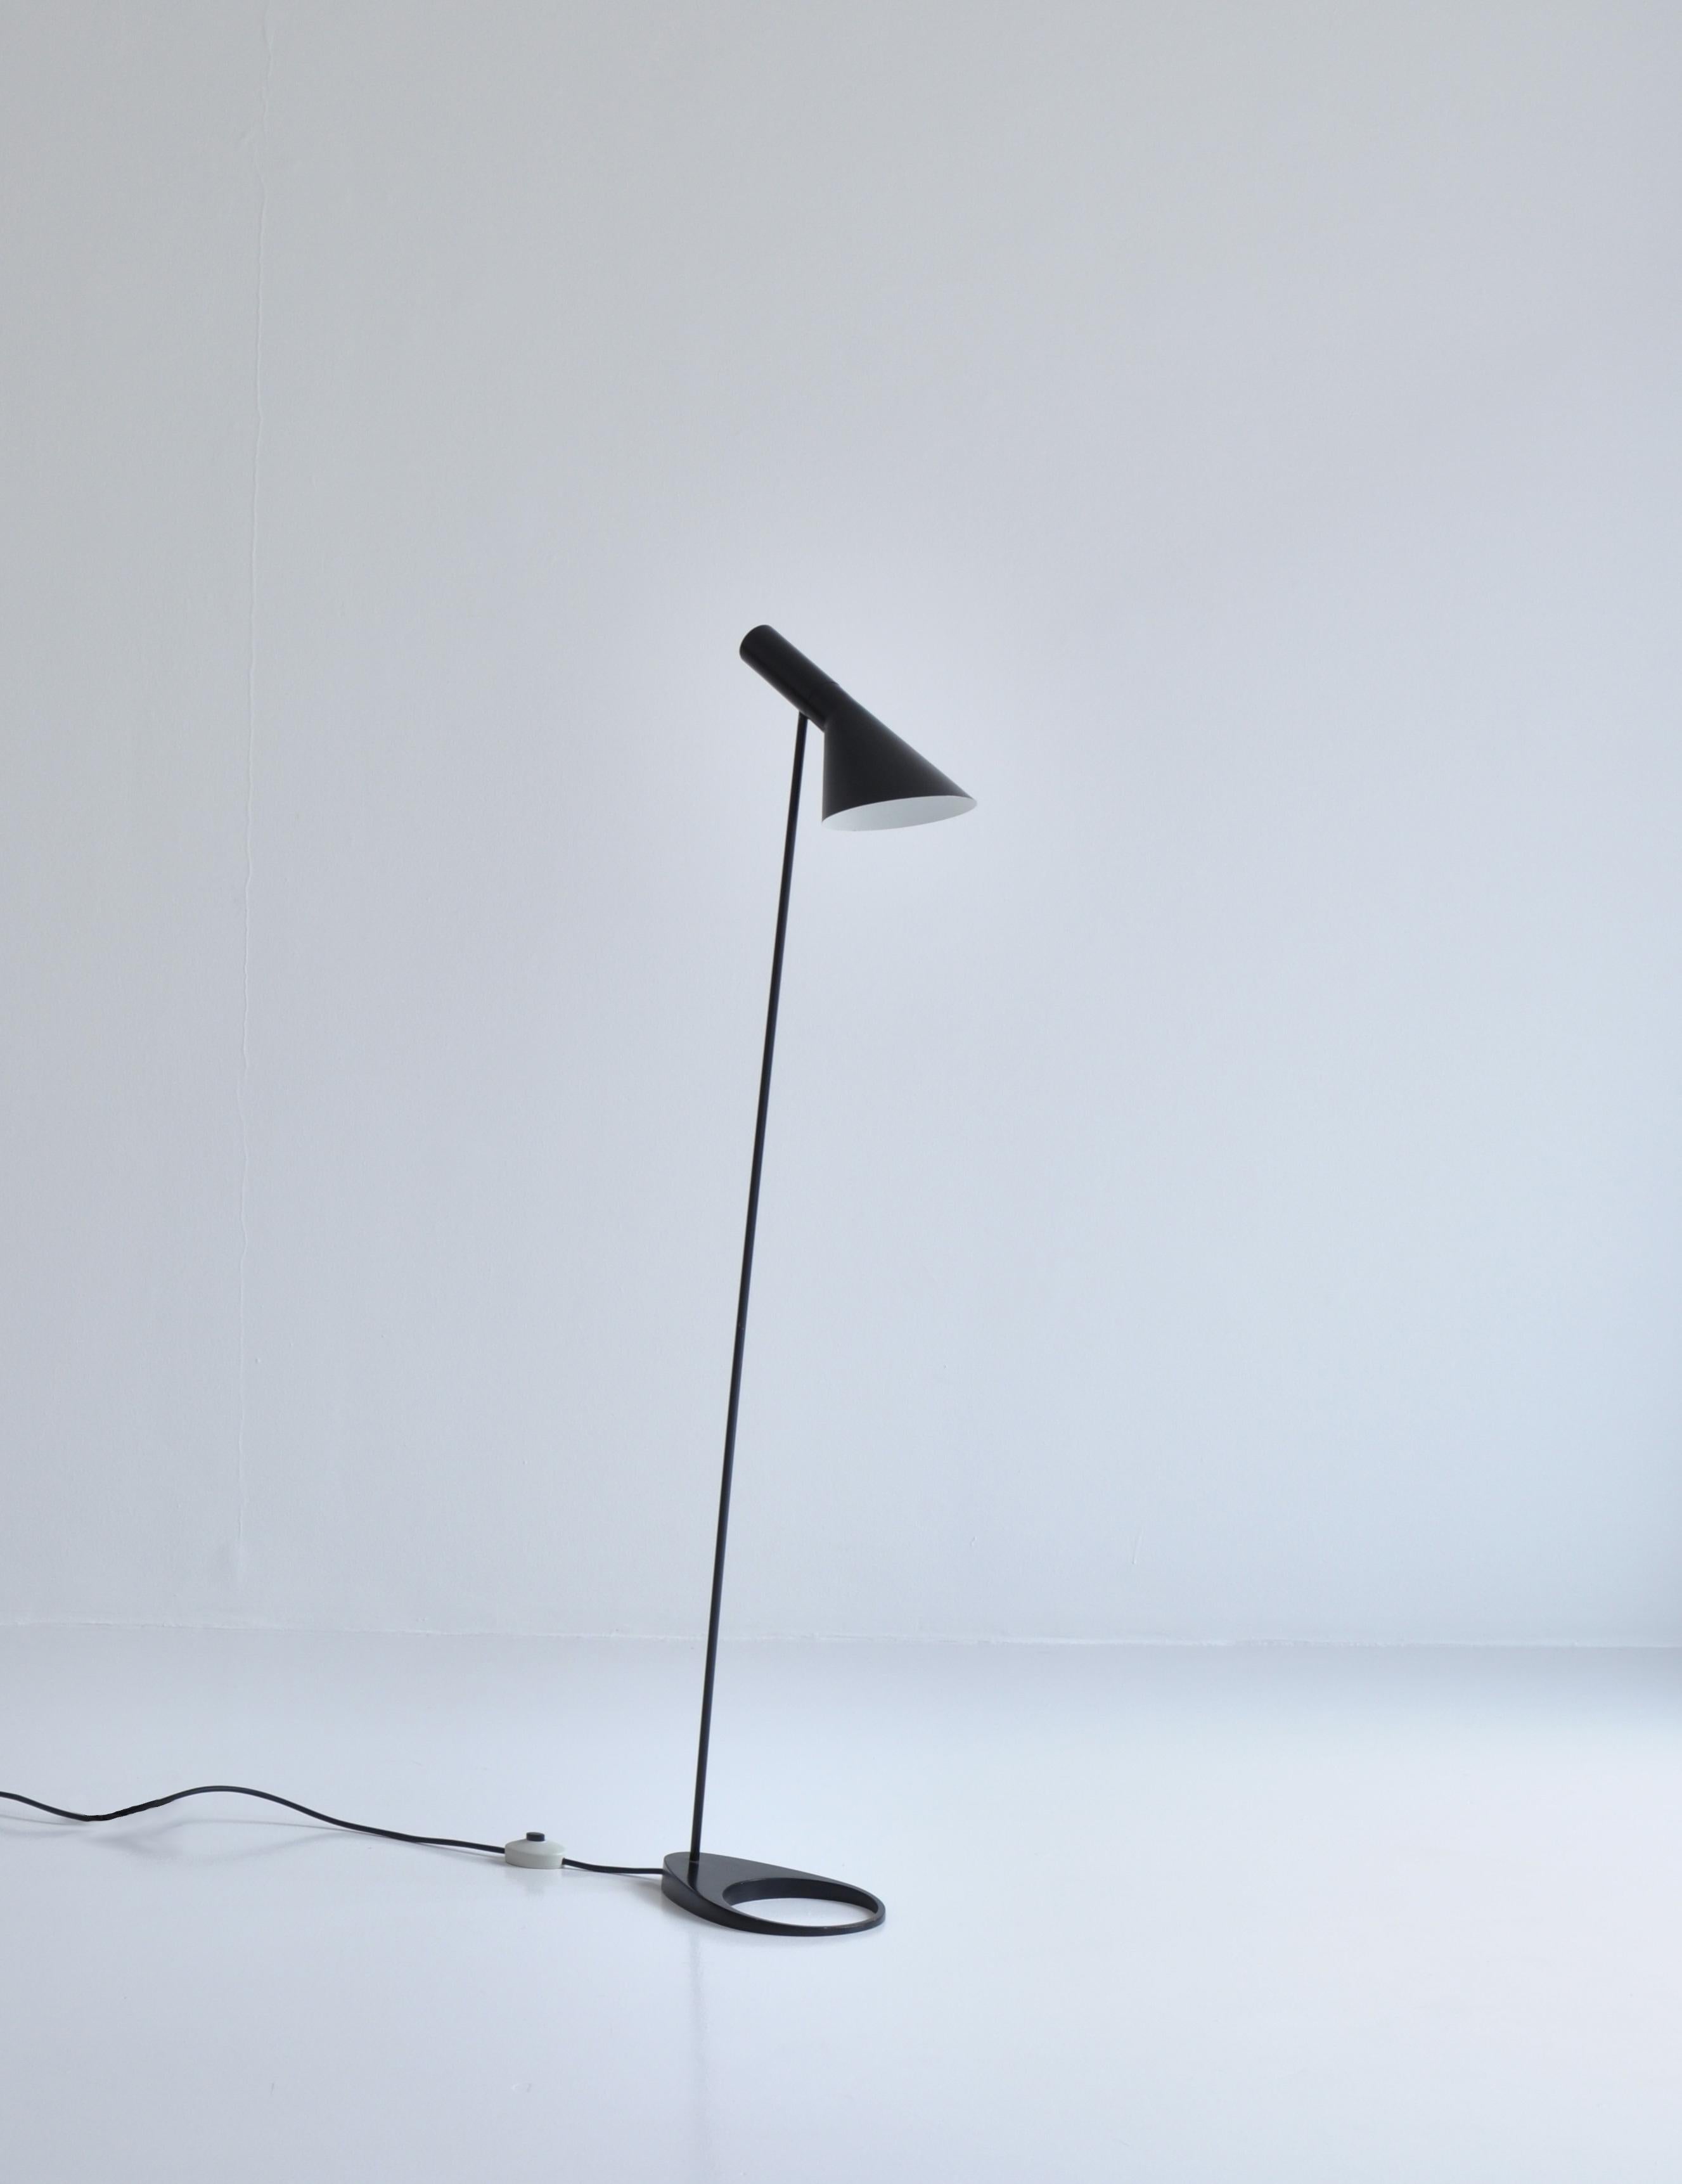 Floor lamp designed by Arne Jacobsen for the SAS Royal Hotel, Copenhagen in 1958 and made by Louis Poulsen Denmark. This lamp is from the early production in the 1960s and still has the original foot switch and wire. It is made from black lacquered